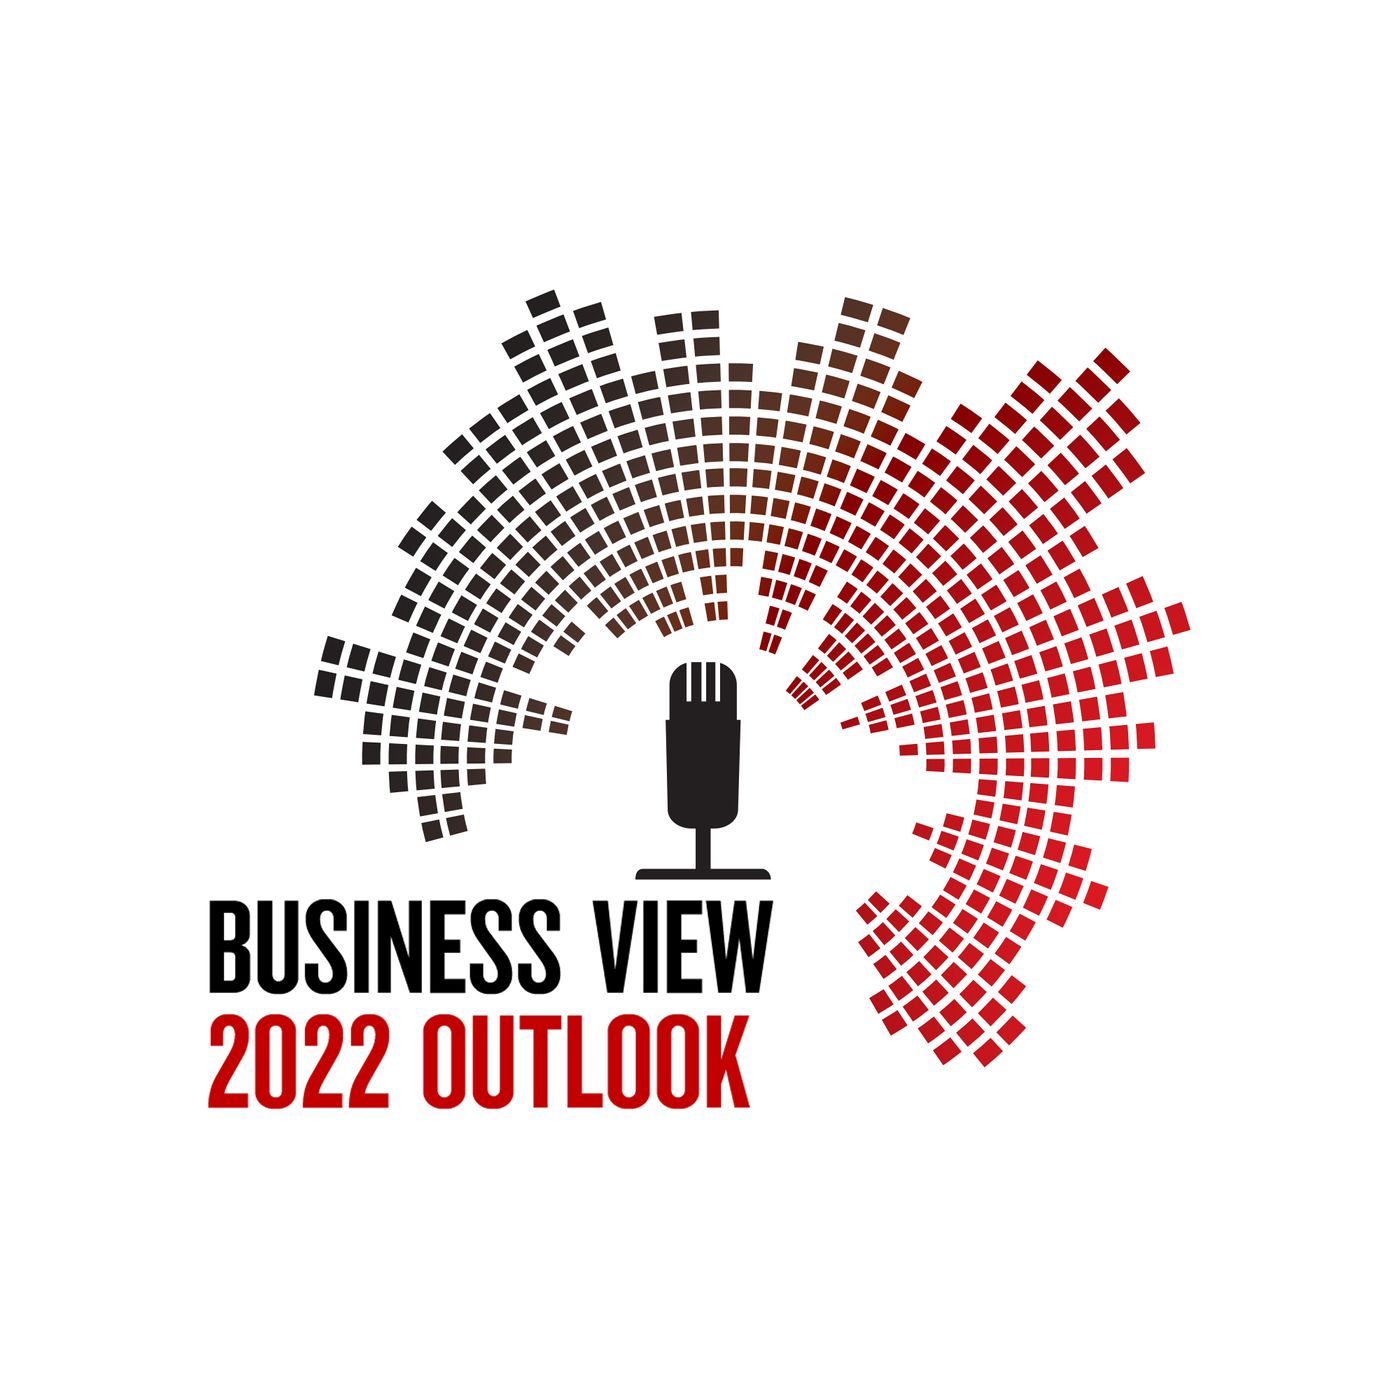 Business View: 2022 Outlook